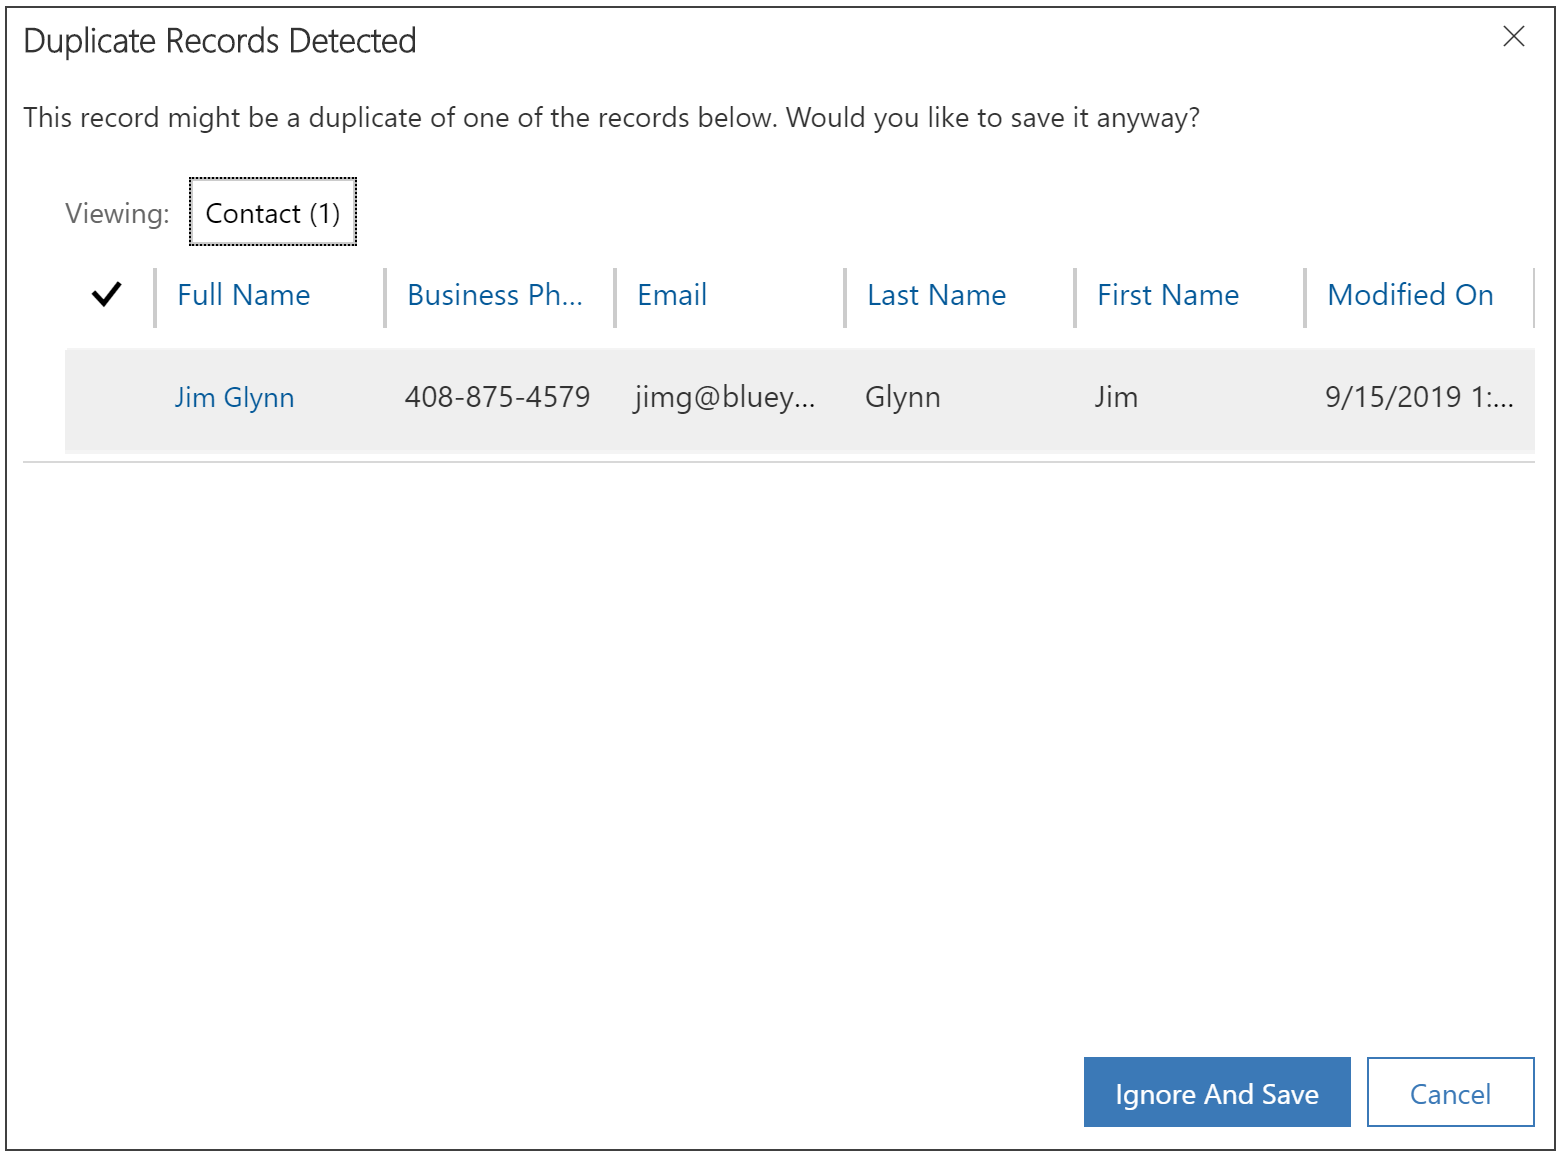 Duplicate contact record detectied in Dynamics 365 Customer Engagement (on-premises).